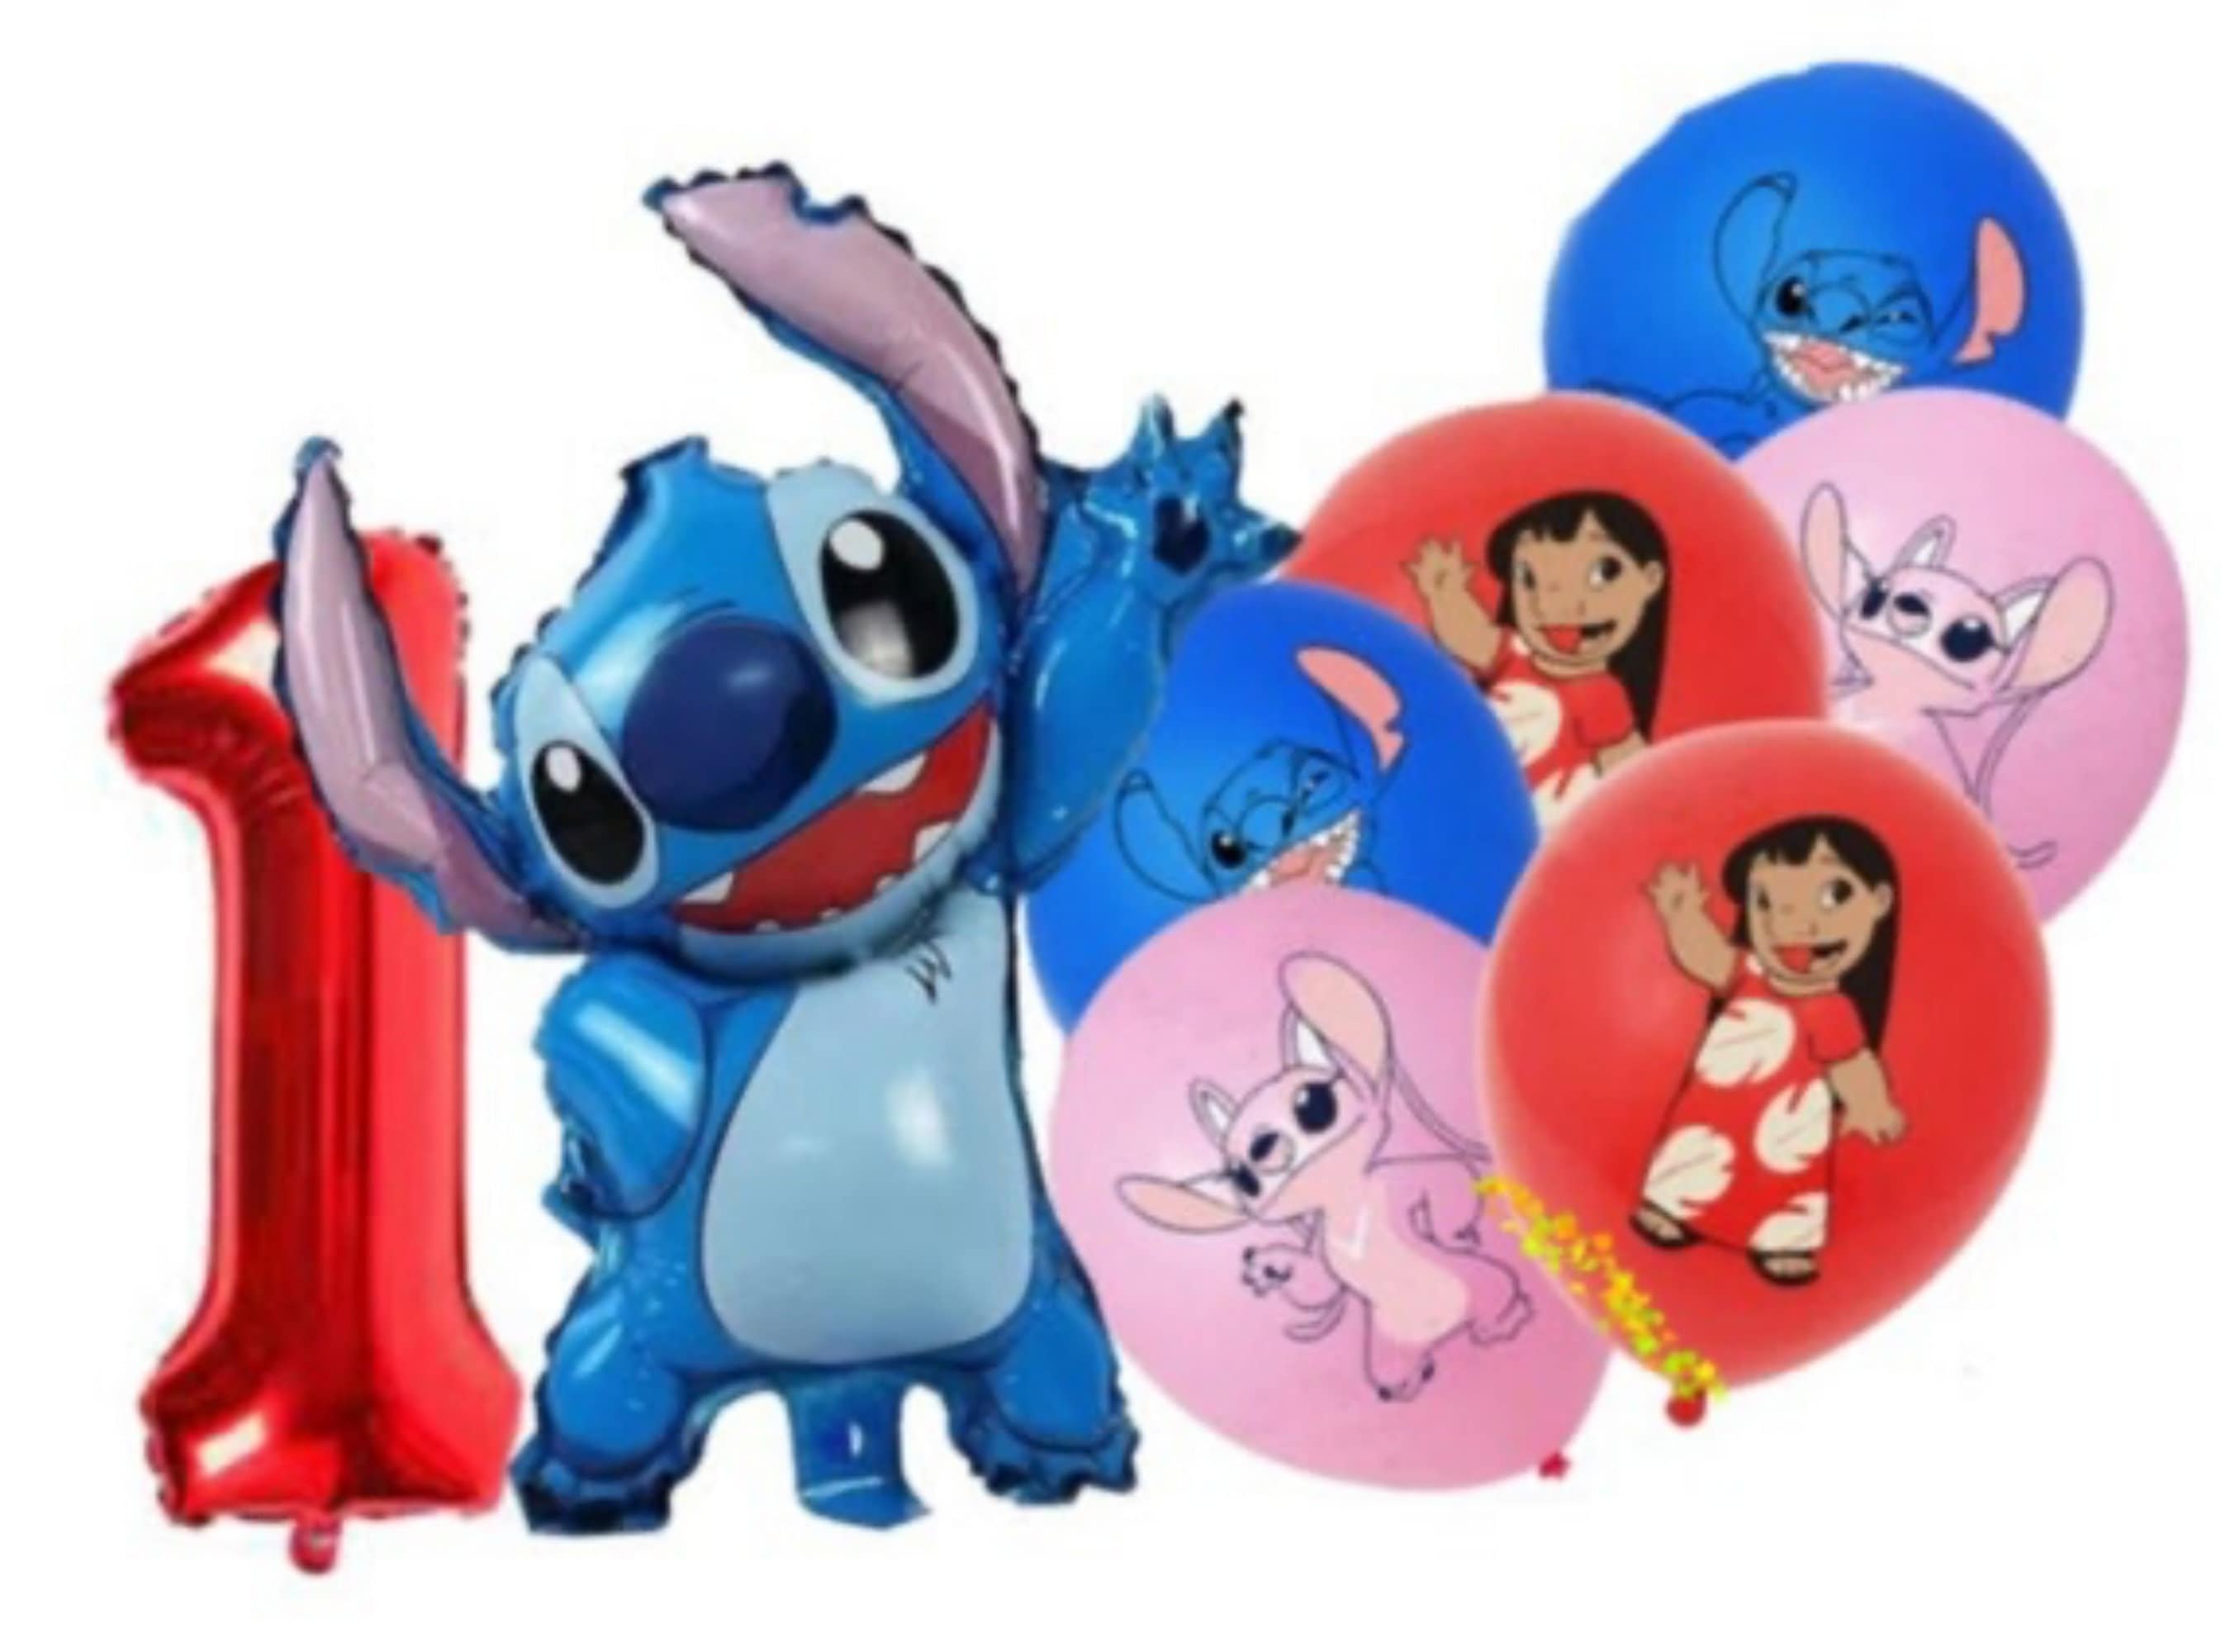 Stitch and Lilo Party Supplies, Lilo and Stitch Birthday Decorations  Include Stitch Foil Balloon, Balloons, Cake Toppers, Birthday Banner,  Stitch